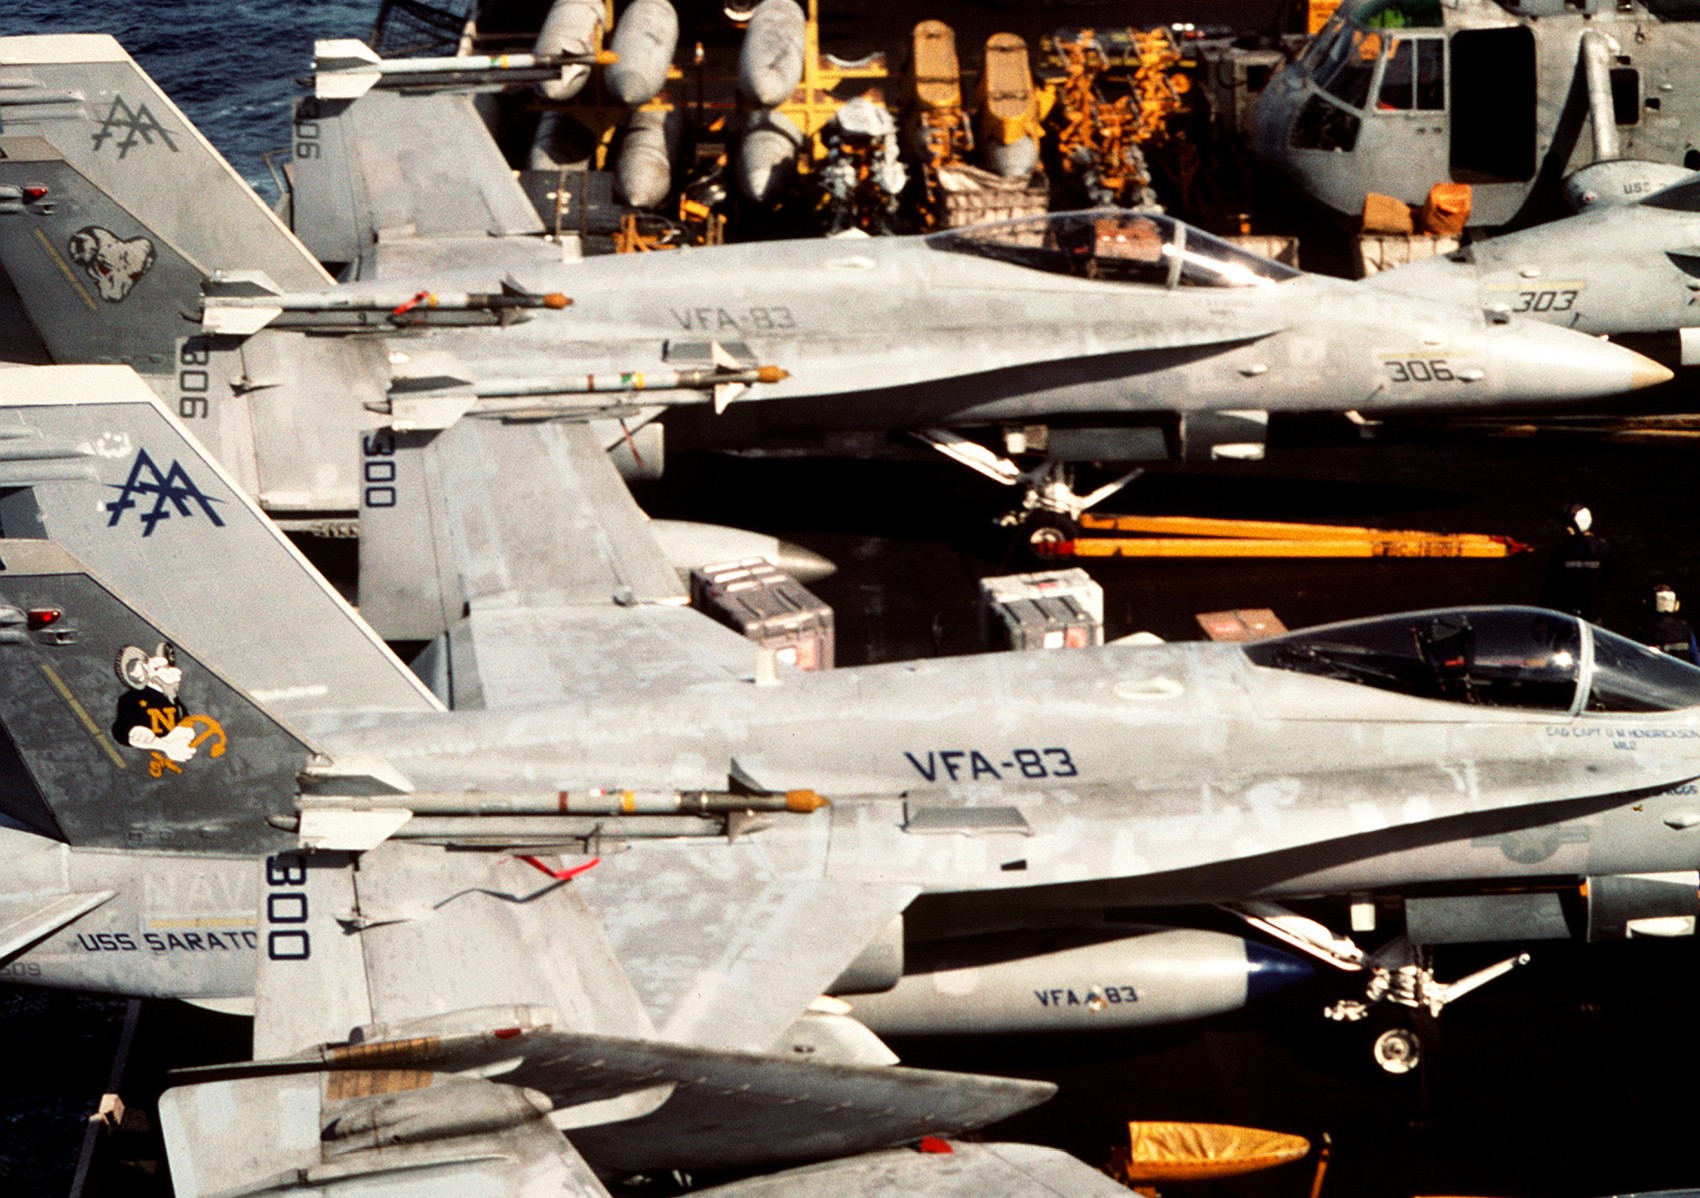 vfa-83 rampagers strike fighter squadron f/a-18c hornet cvw-17 uss saratoga cv-60 156